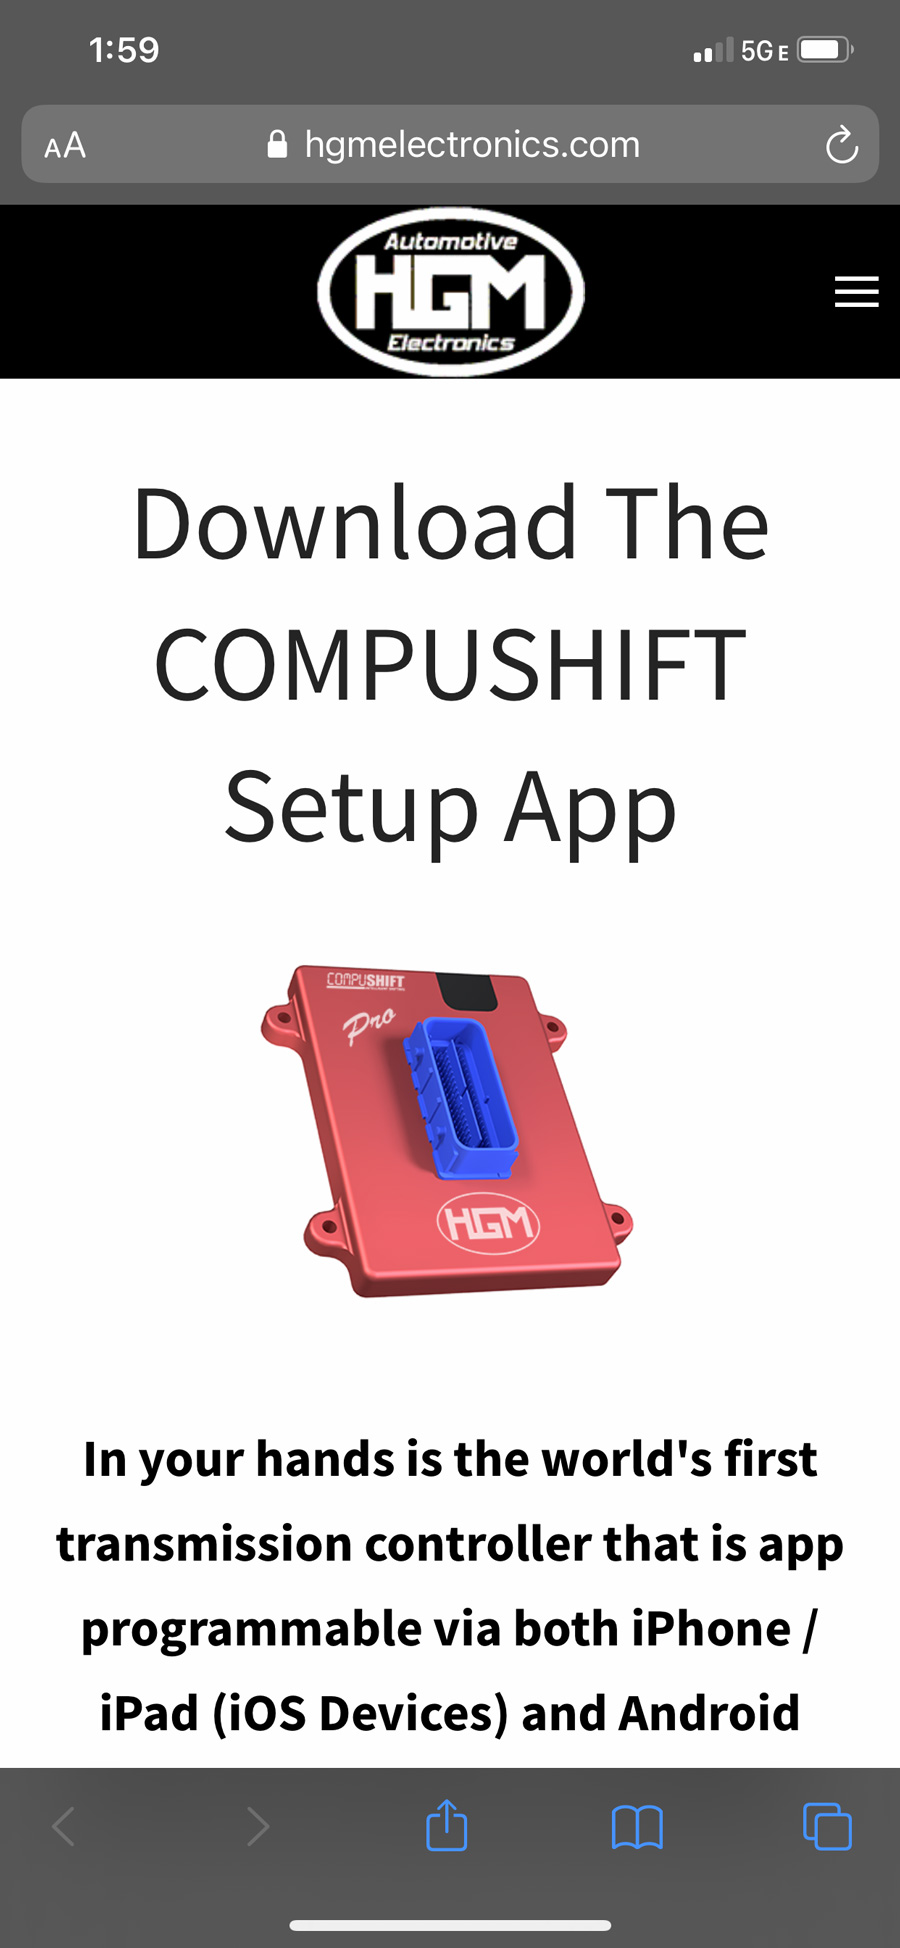 Simply scan the QR code printed on the CompuShift TCU